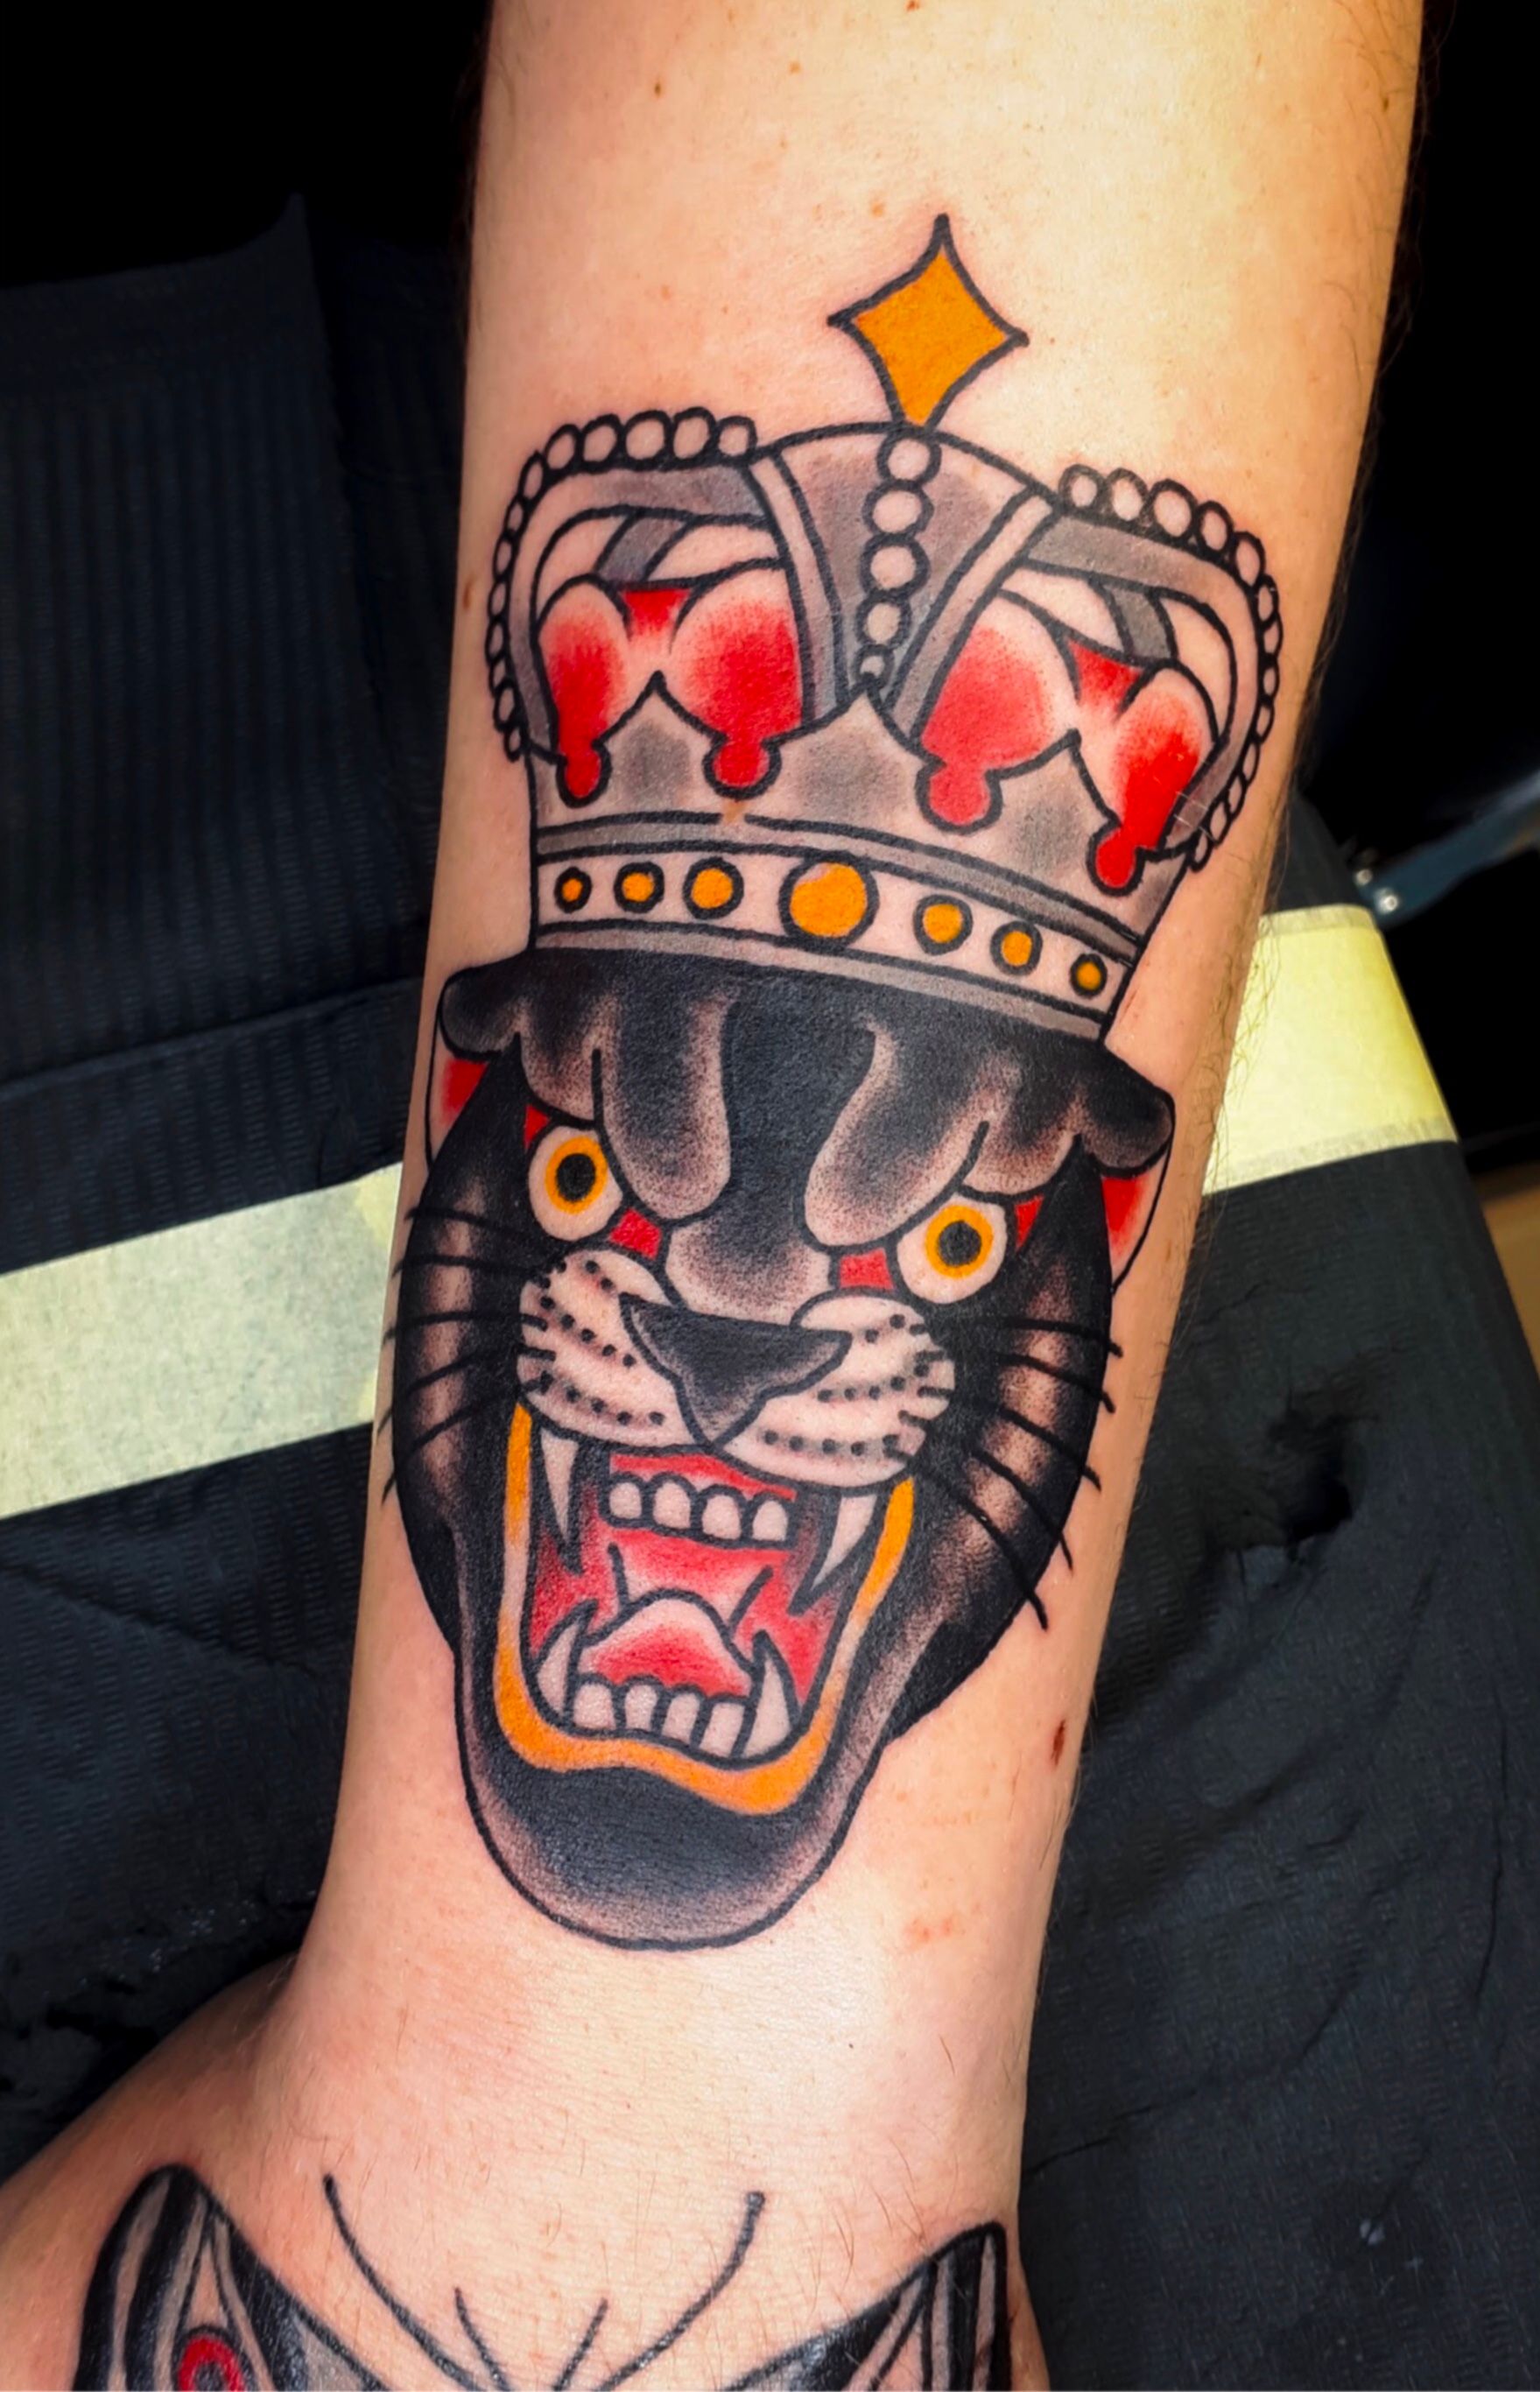 Lucky Soul Tattoo  Sweet native wolf by Jim jal71 Jim and that black and  gray     luckysoul luckysoultattoo wolf wolftattoo headress  nativetattoo cultural appropriation isit ohwell tattoosarecool  donttakeyourselftooseriously 